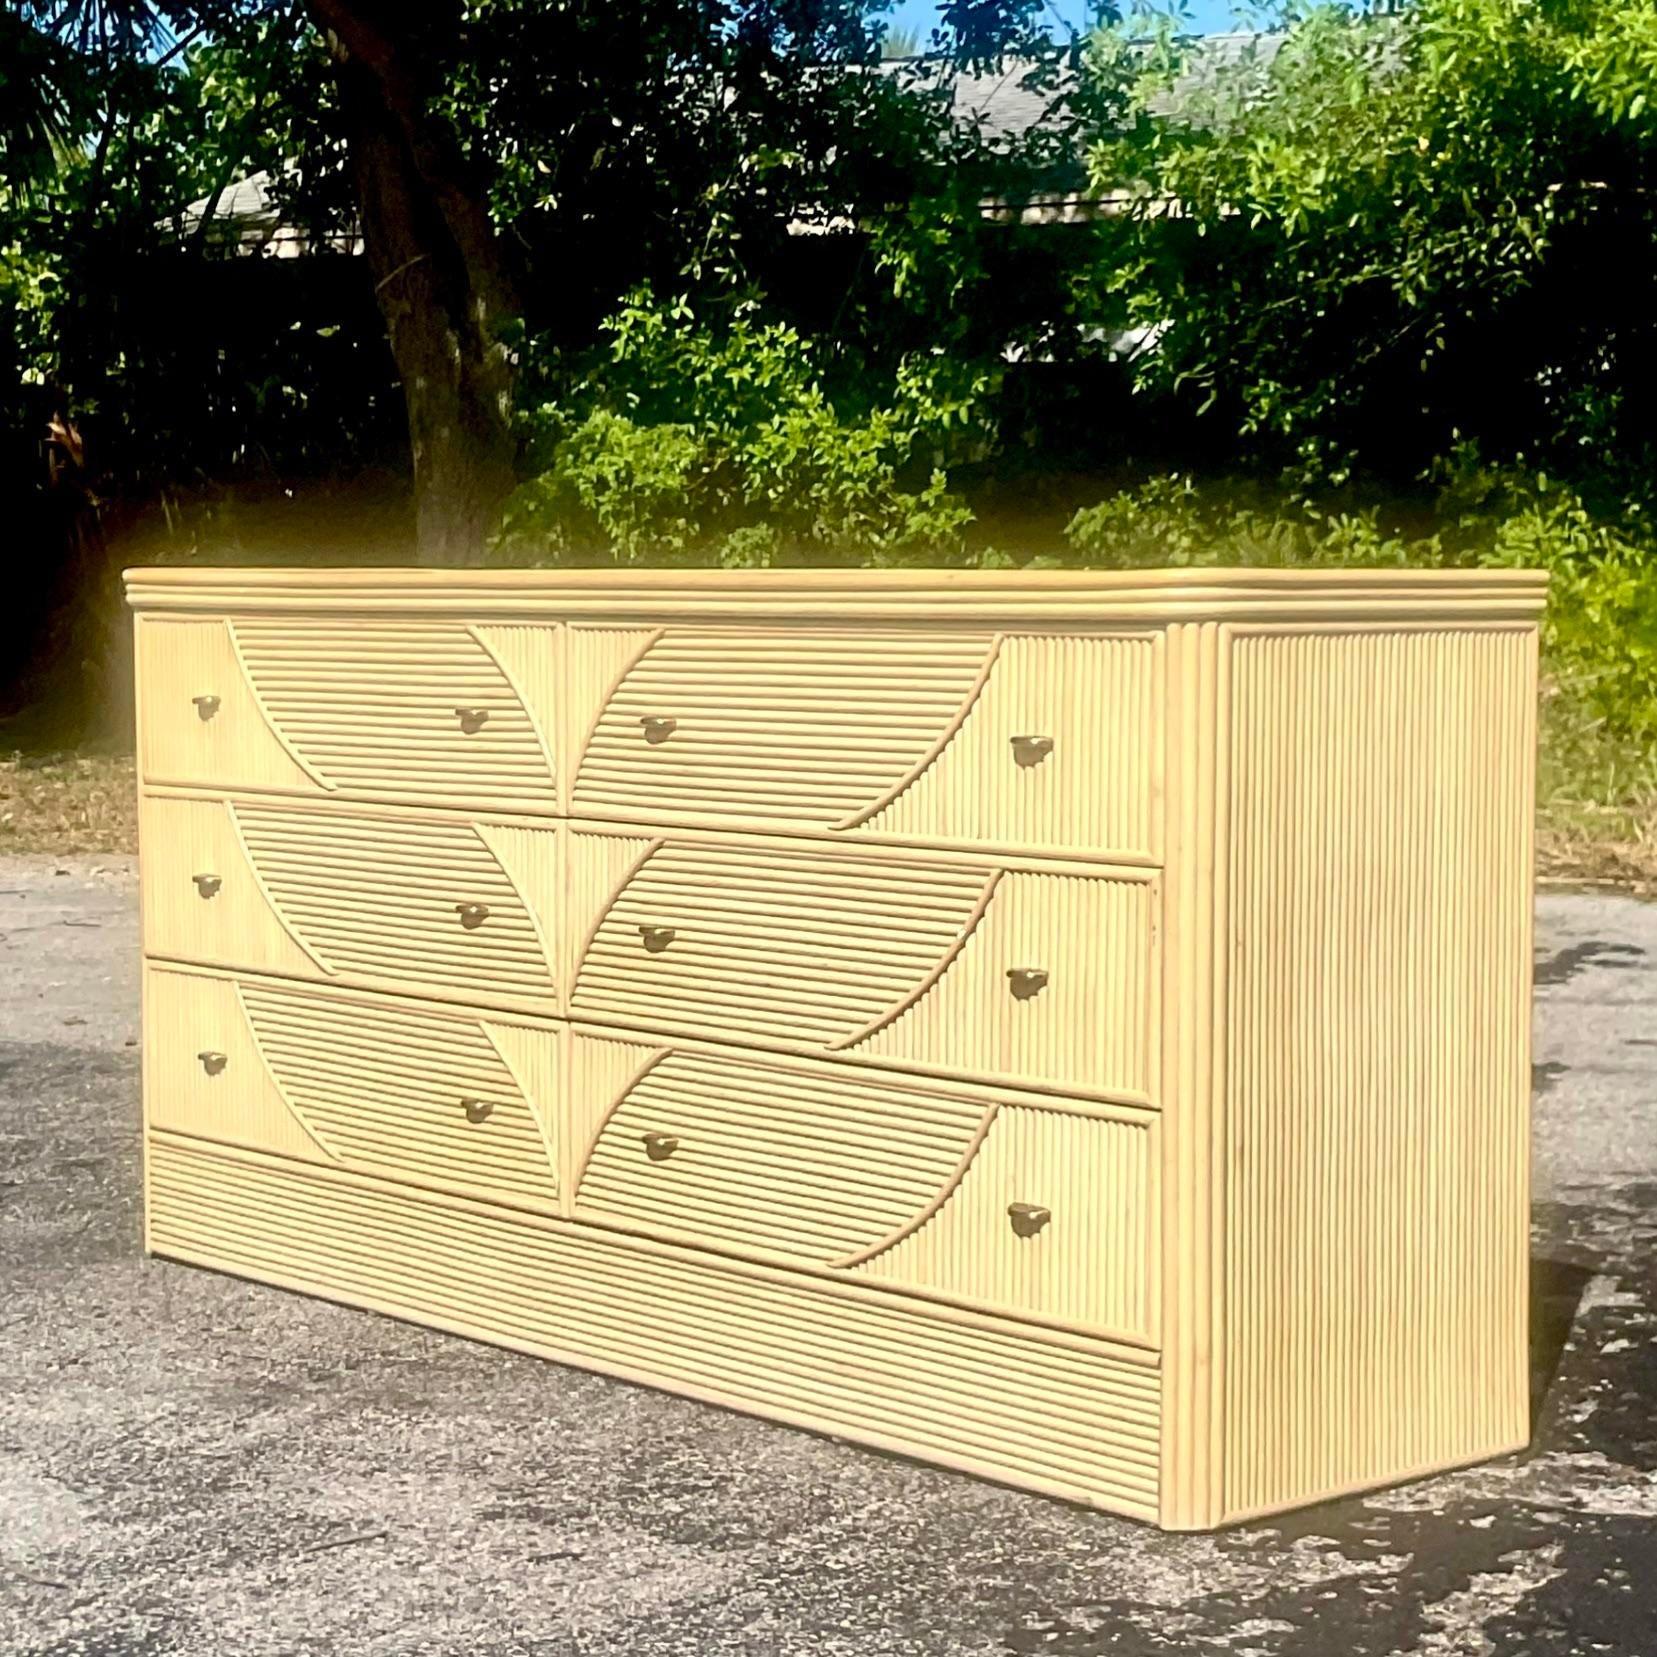 A fabulous vintage Coastal dresser. A chic cerused pencil reed with a leaf design. Acquired from a Palm Beach estate.